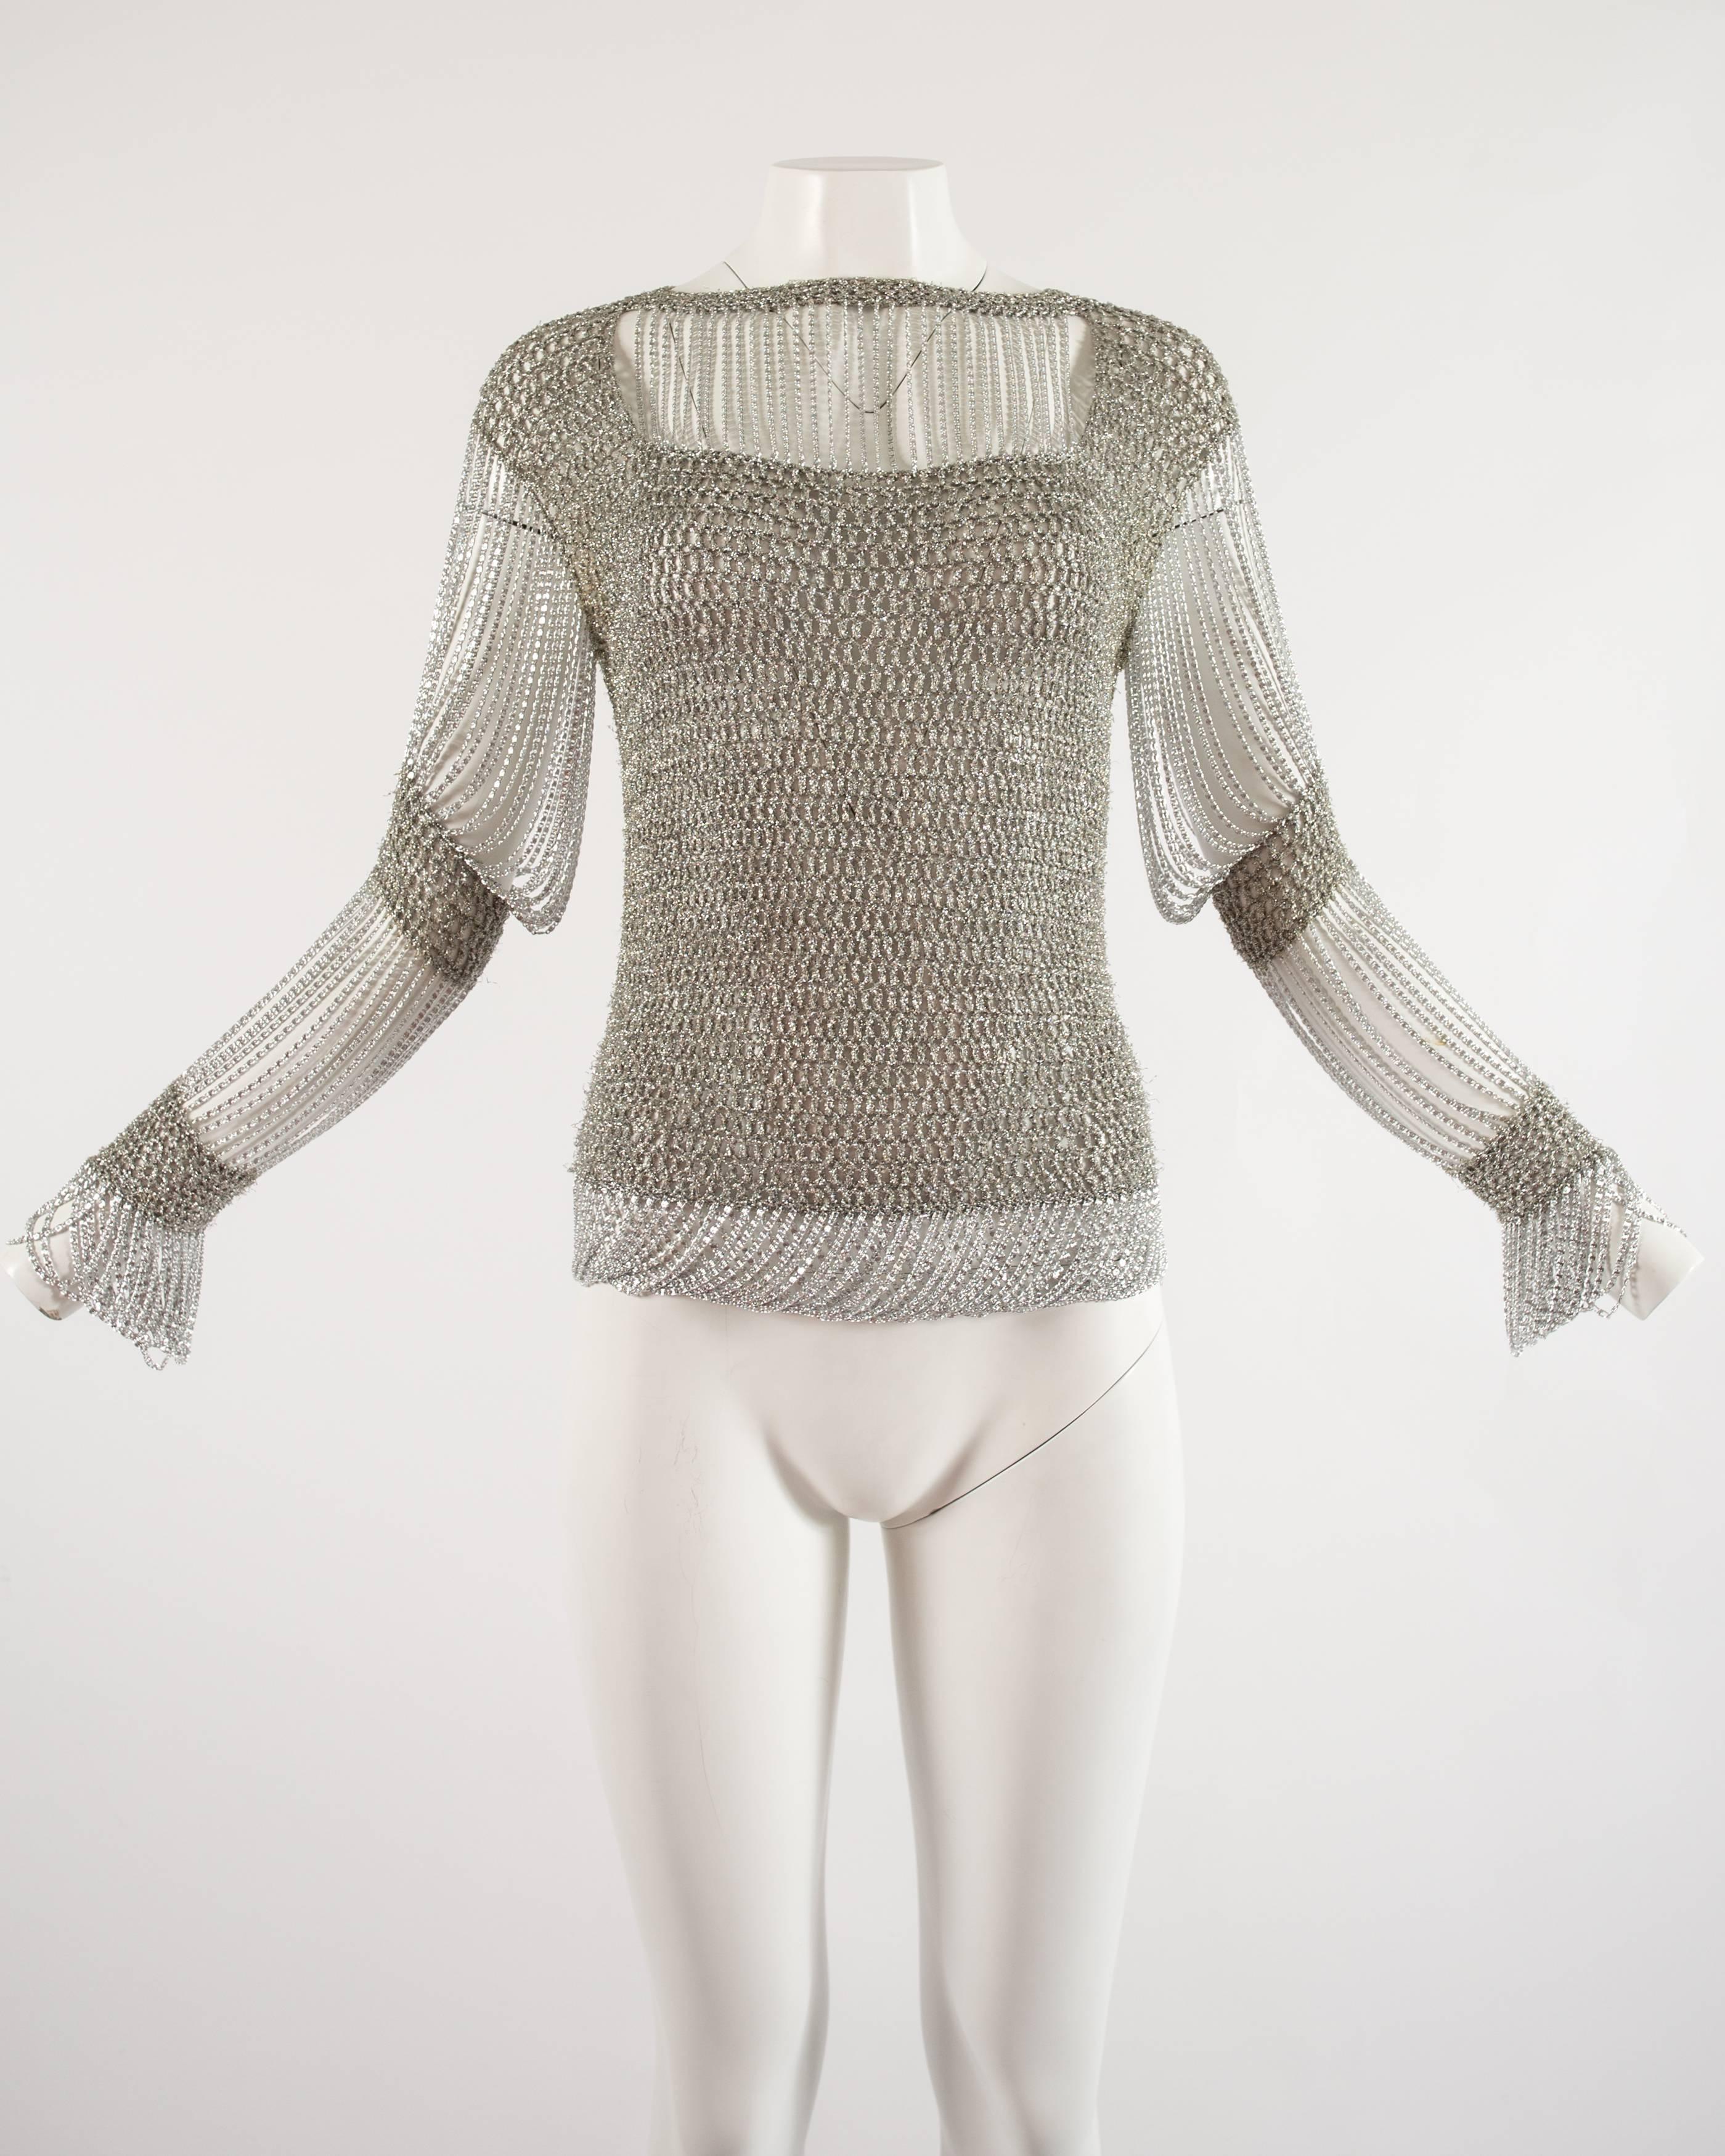 Loris Azzaro 1970s silver chain and lurex knit evening sweater